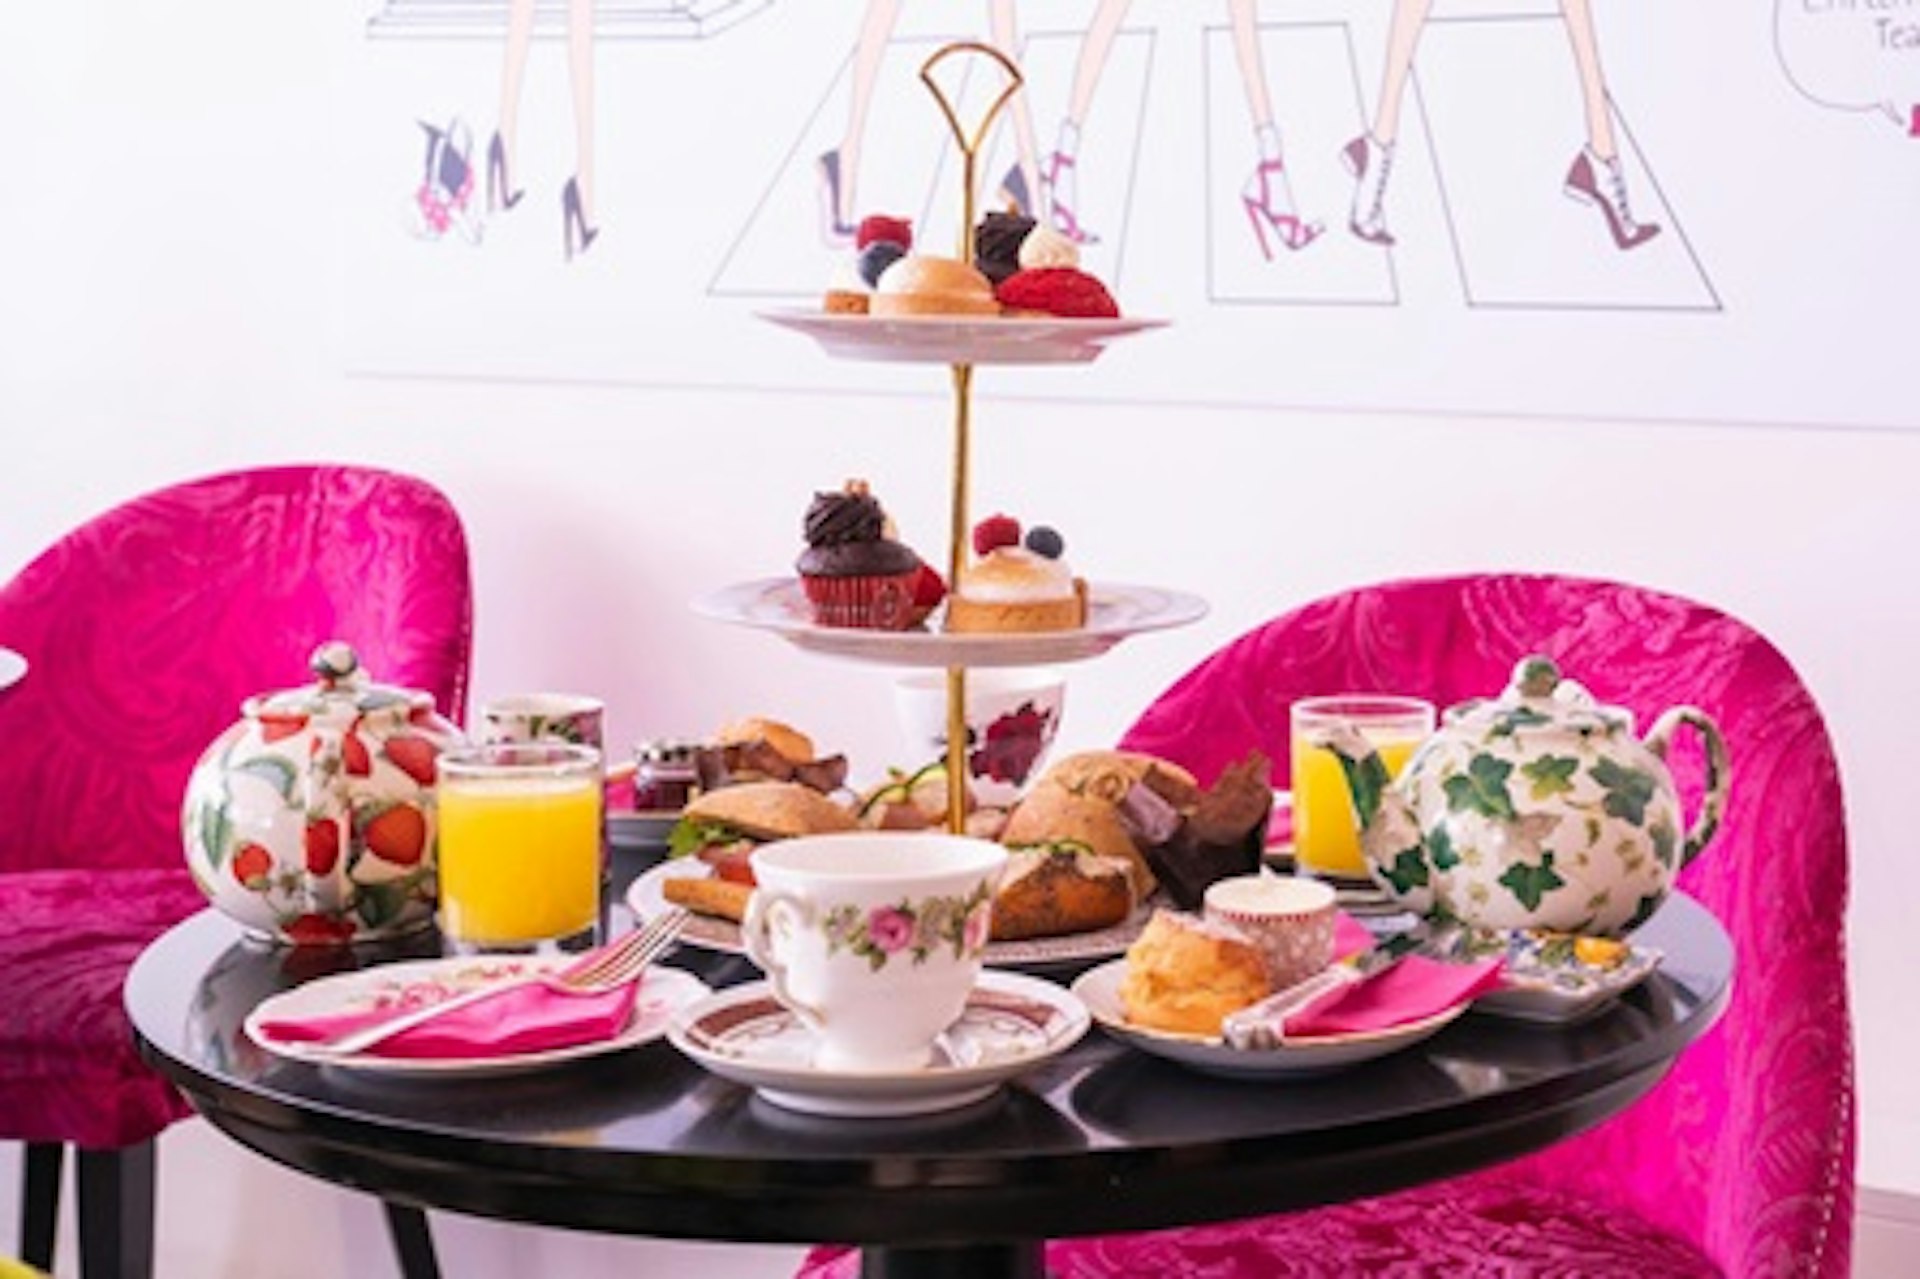 Bottomless Gin Cocktail Afternoon Tea for Two at Brigit's Bakery Covent Garden 1